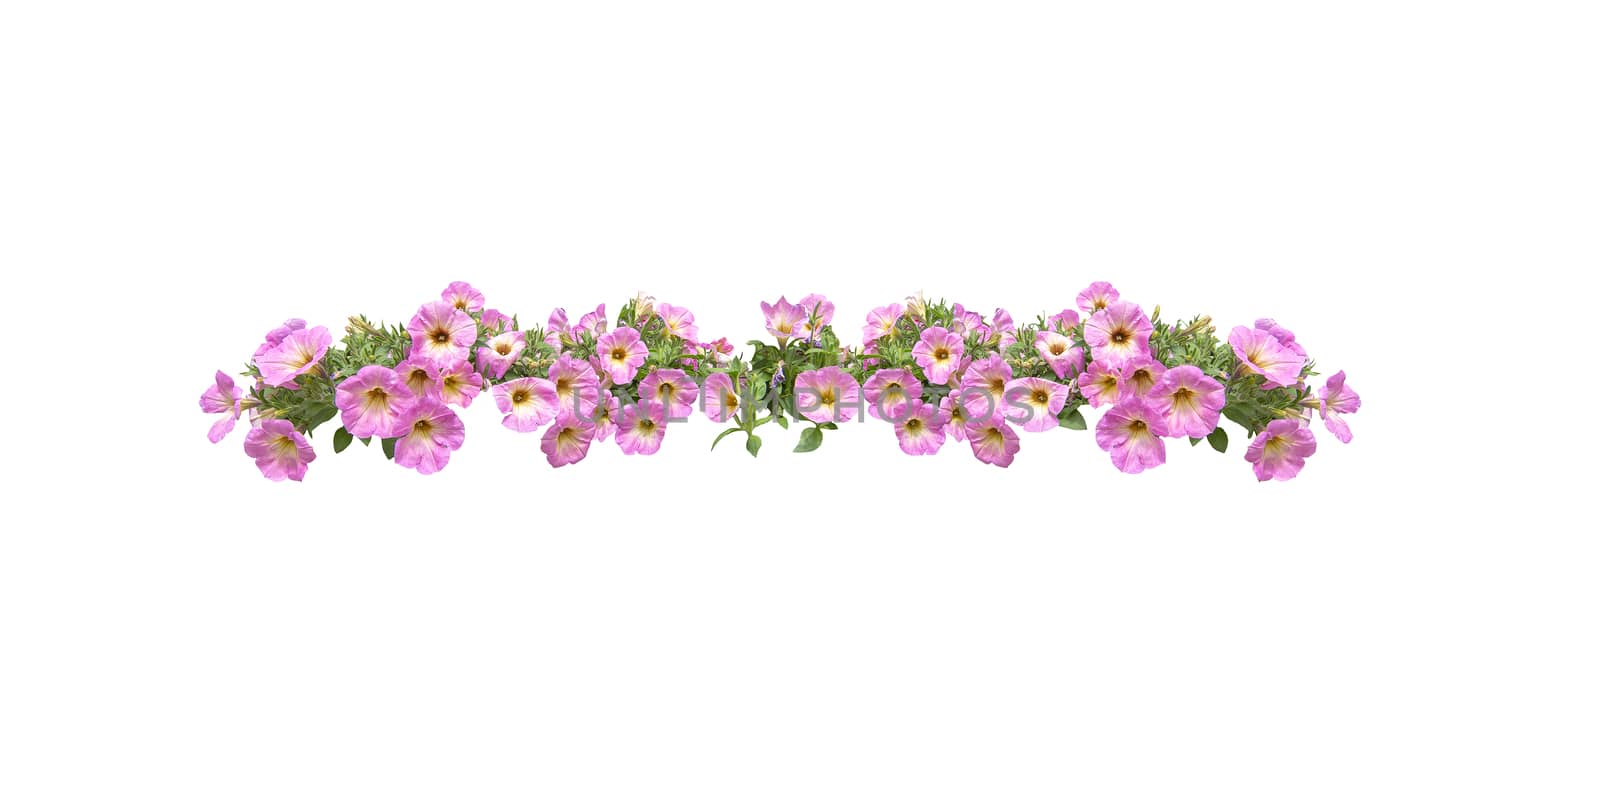 Pink petunia flowers string margin element isolated  by ArtesiaWells